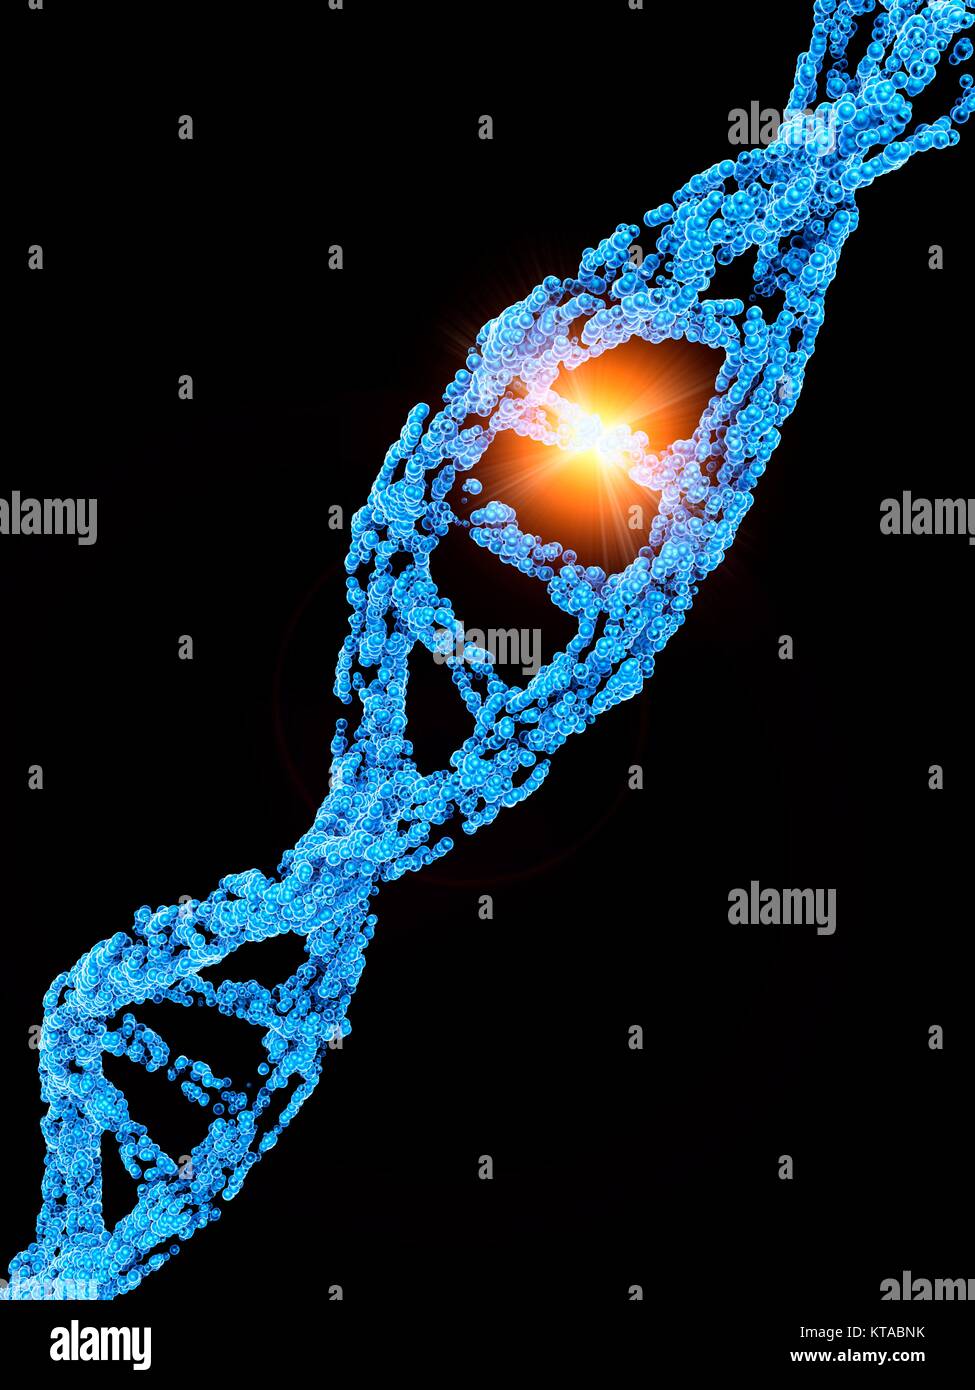 Computer graphic illustration depicting a point mutation. A point mutation is a genetic mutation where a single nucleotide base is changed, inserted or deleted from a sequence of DNA or RNA. Point mutations have a variety of effects on the downstream protein productâ€”consequences that are moderately predictable based upon the specifics of the mutation. These consequences can range from benign (e.g. synonymous mutations) to catastrophic (e.g. frameshift mutations), with regard to protein production, composition, and function. Stock Photo